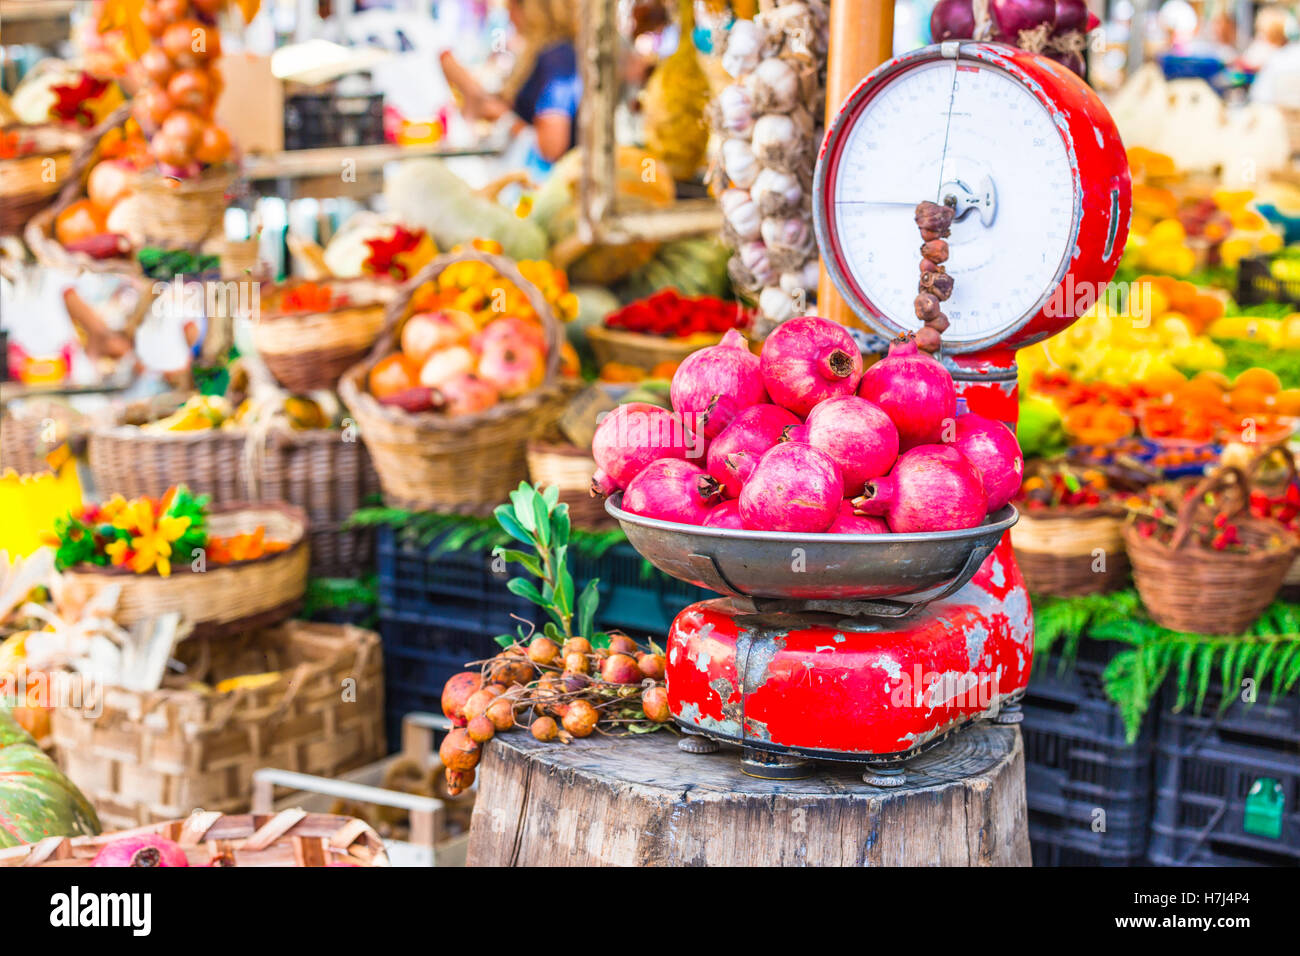 Market still life from fruits and vegetables in famous Campo di Fiori square in Rome. Italy Stock Photo